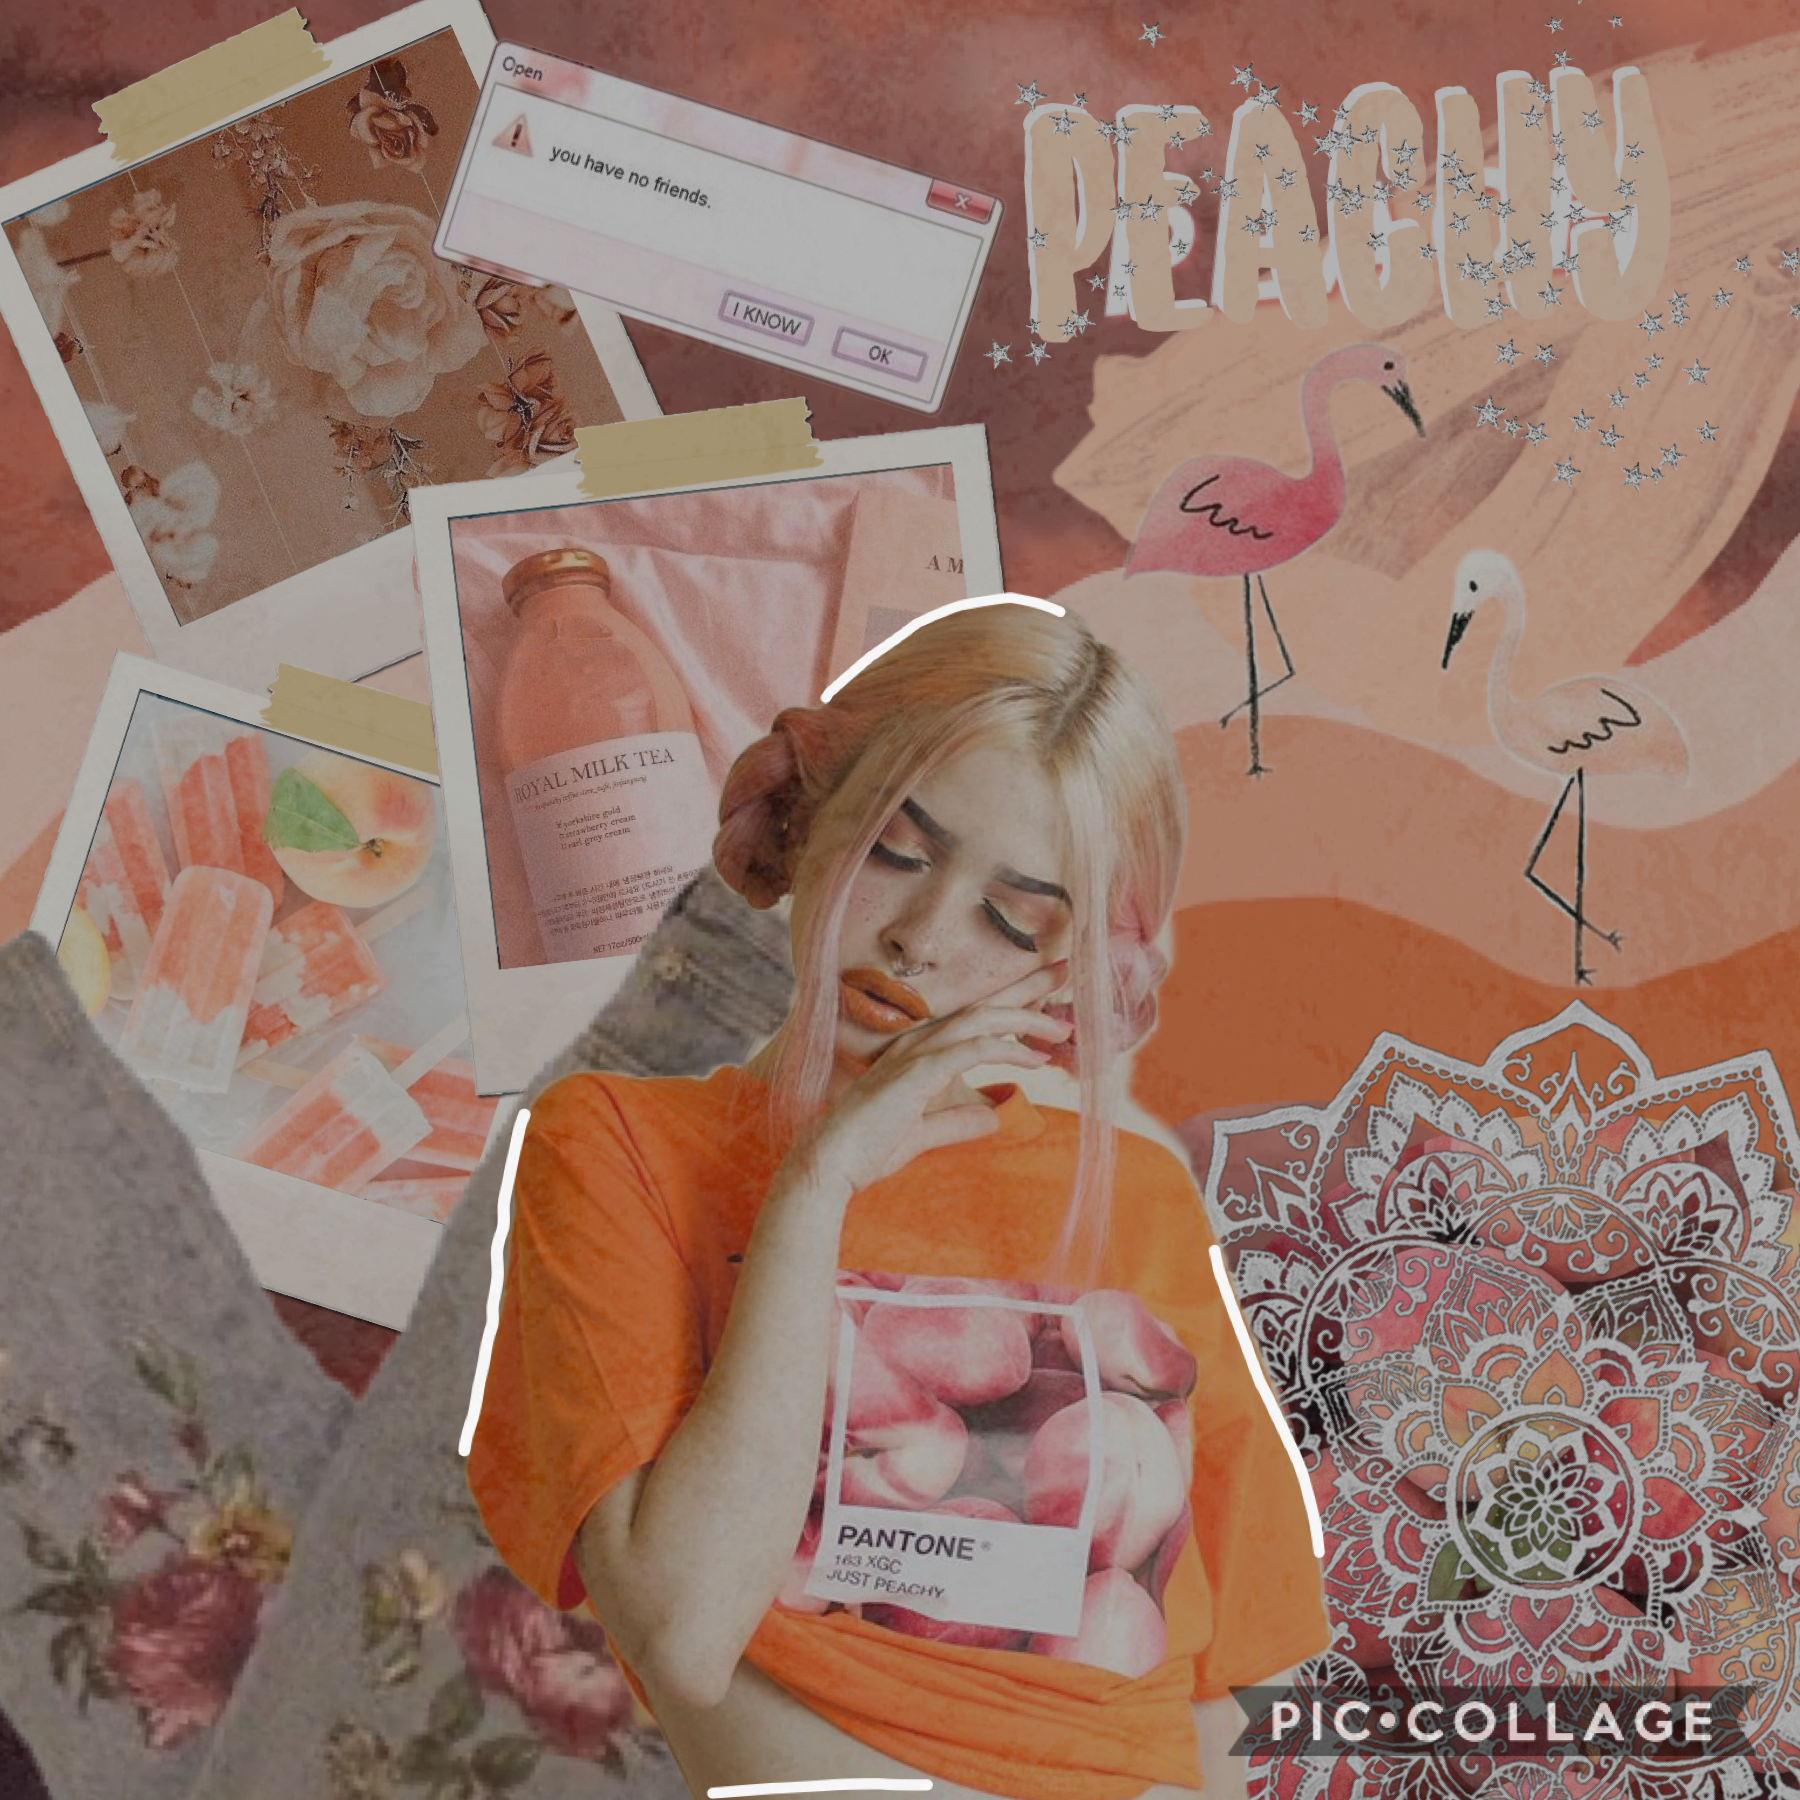 ✨tap✨ 
Ok so I tried a peachy aesthetic 
But I don’t think it’s my type of aesthetic 
So I’ll keep trying y’all! 
And I hope y’all like this!✨